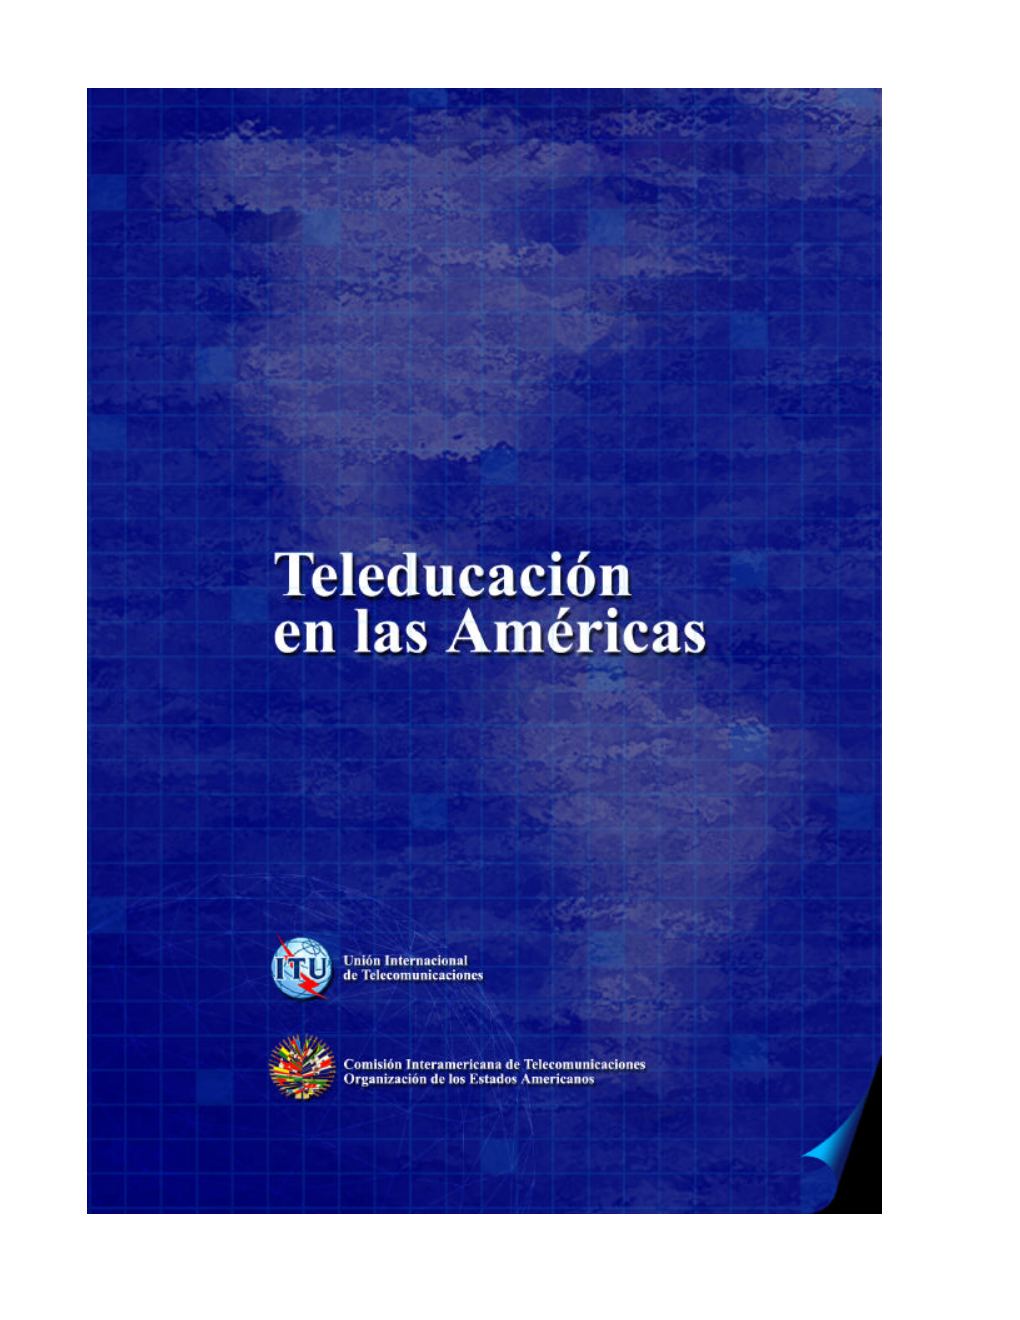 Tele-Education in the Americas